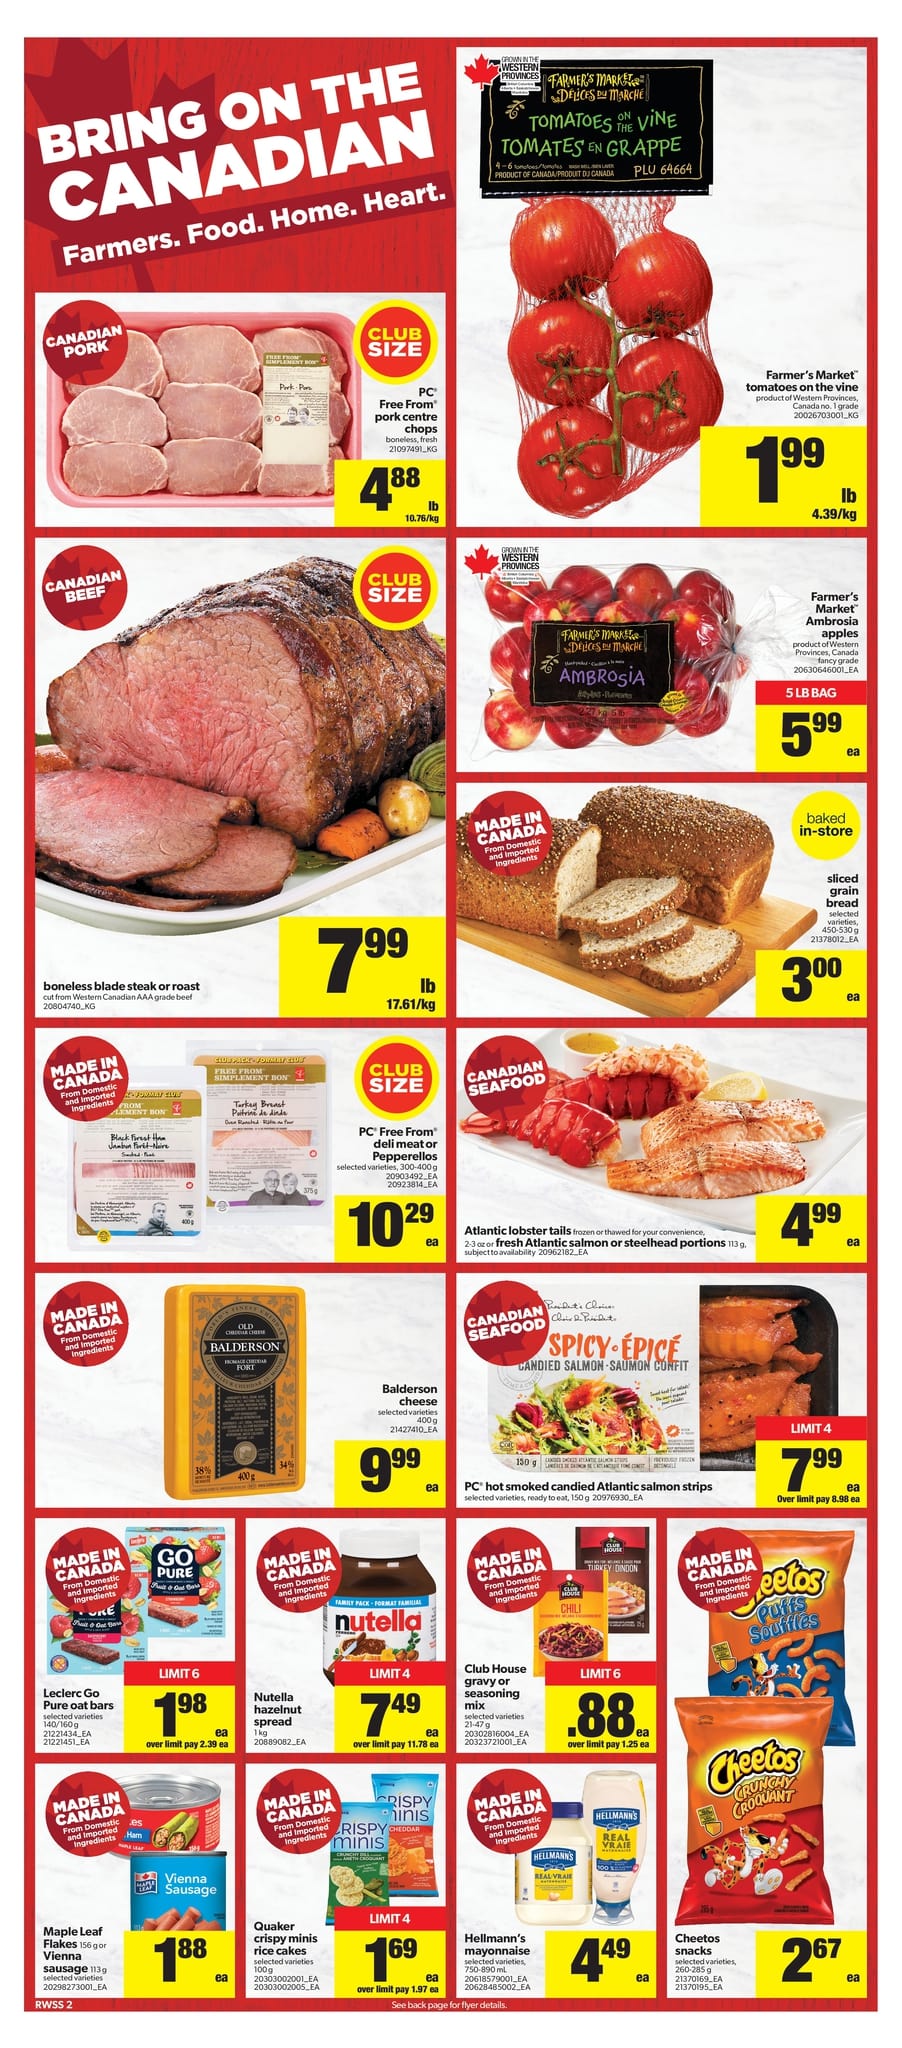 Real Canadian Superstore Western Canada - Weekly Flyer Specials - Page 3